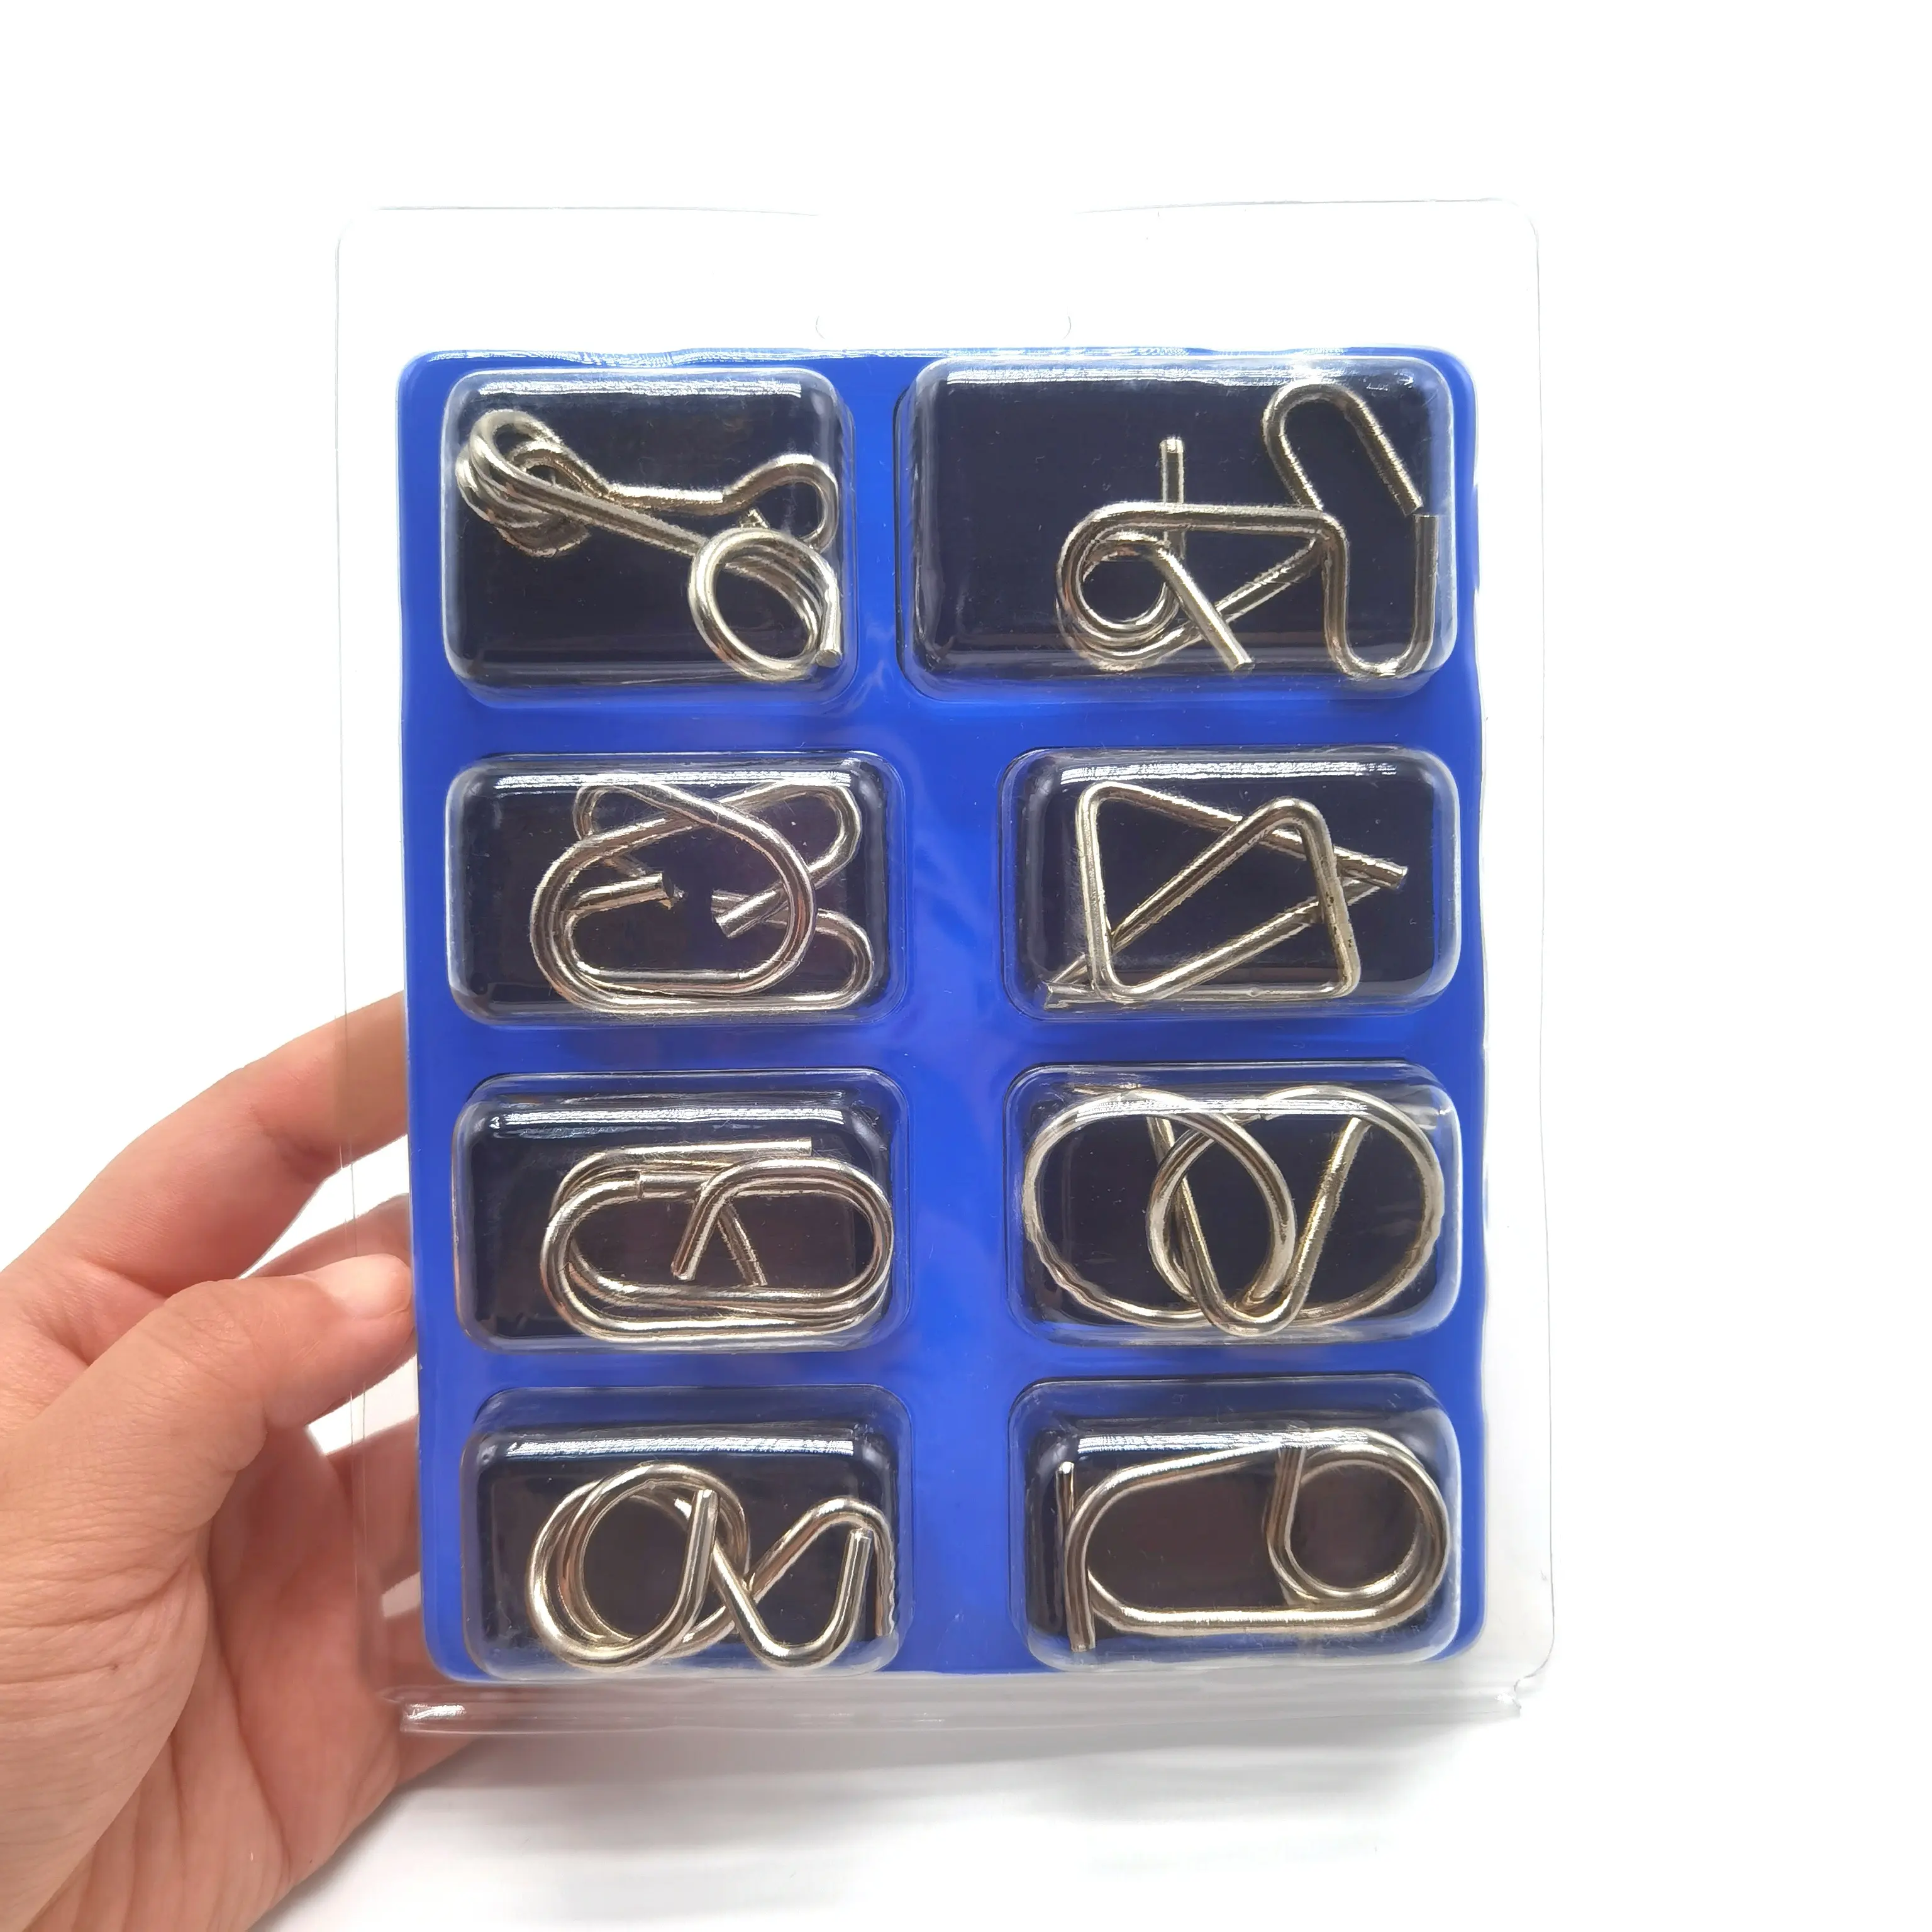 Chinese 5 Linked Rings Brainteaser Wire & Metal Puzzle Educational Toy JBBLCA